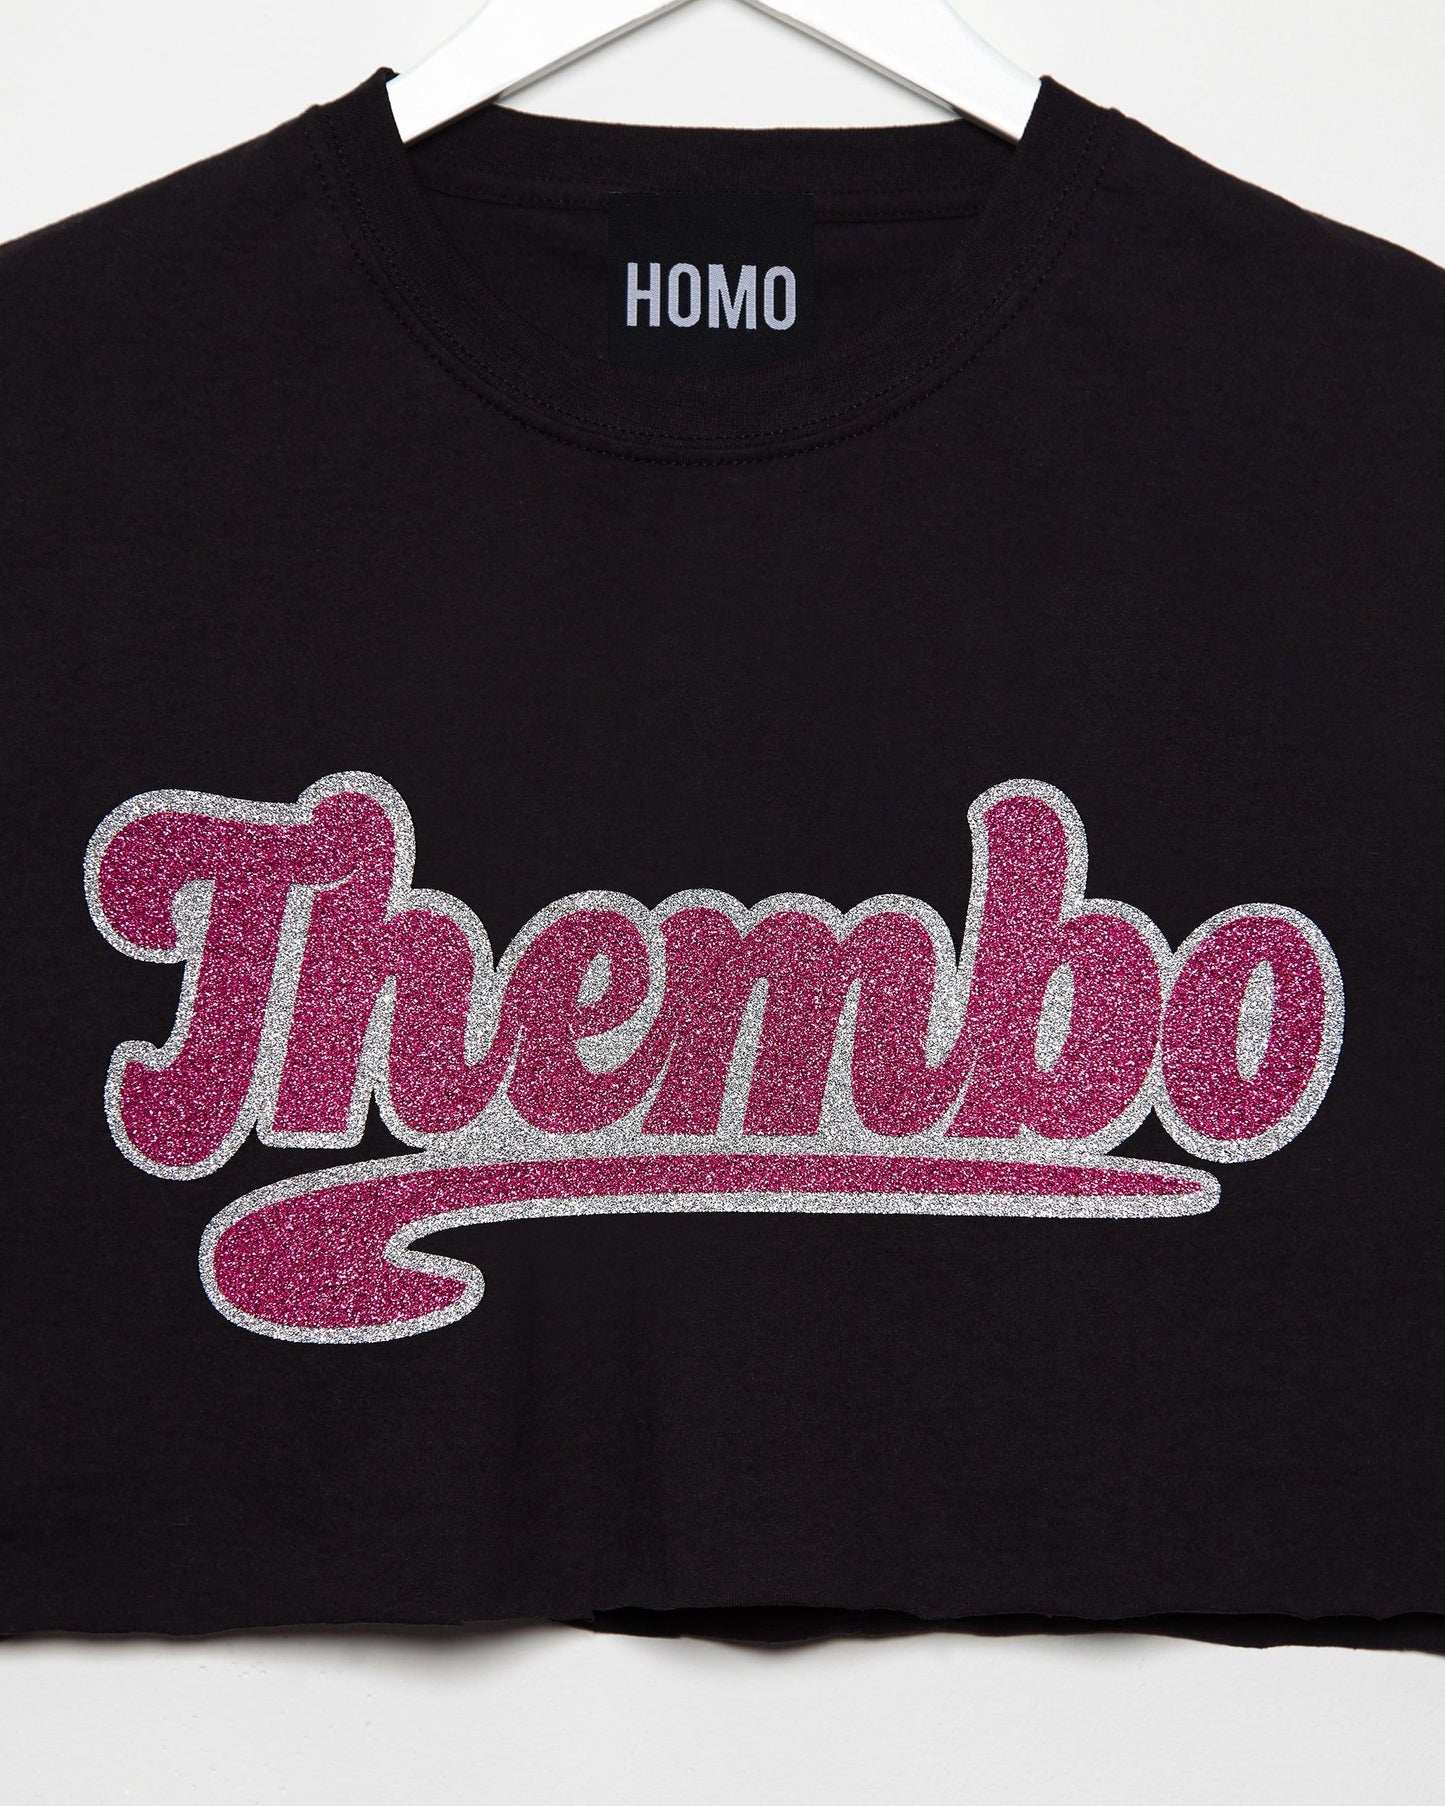 Thembo, pink/silver glitter on black - Sleeveless crop-top.